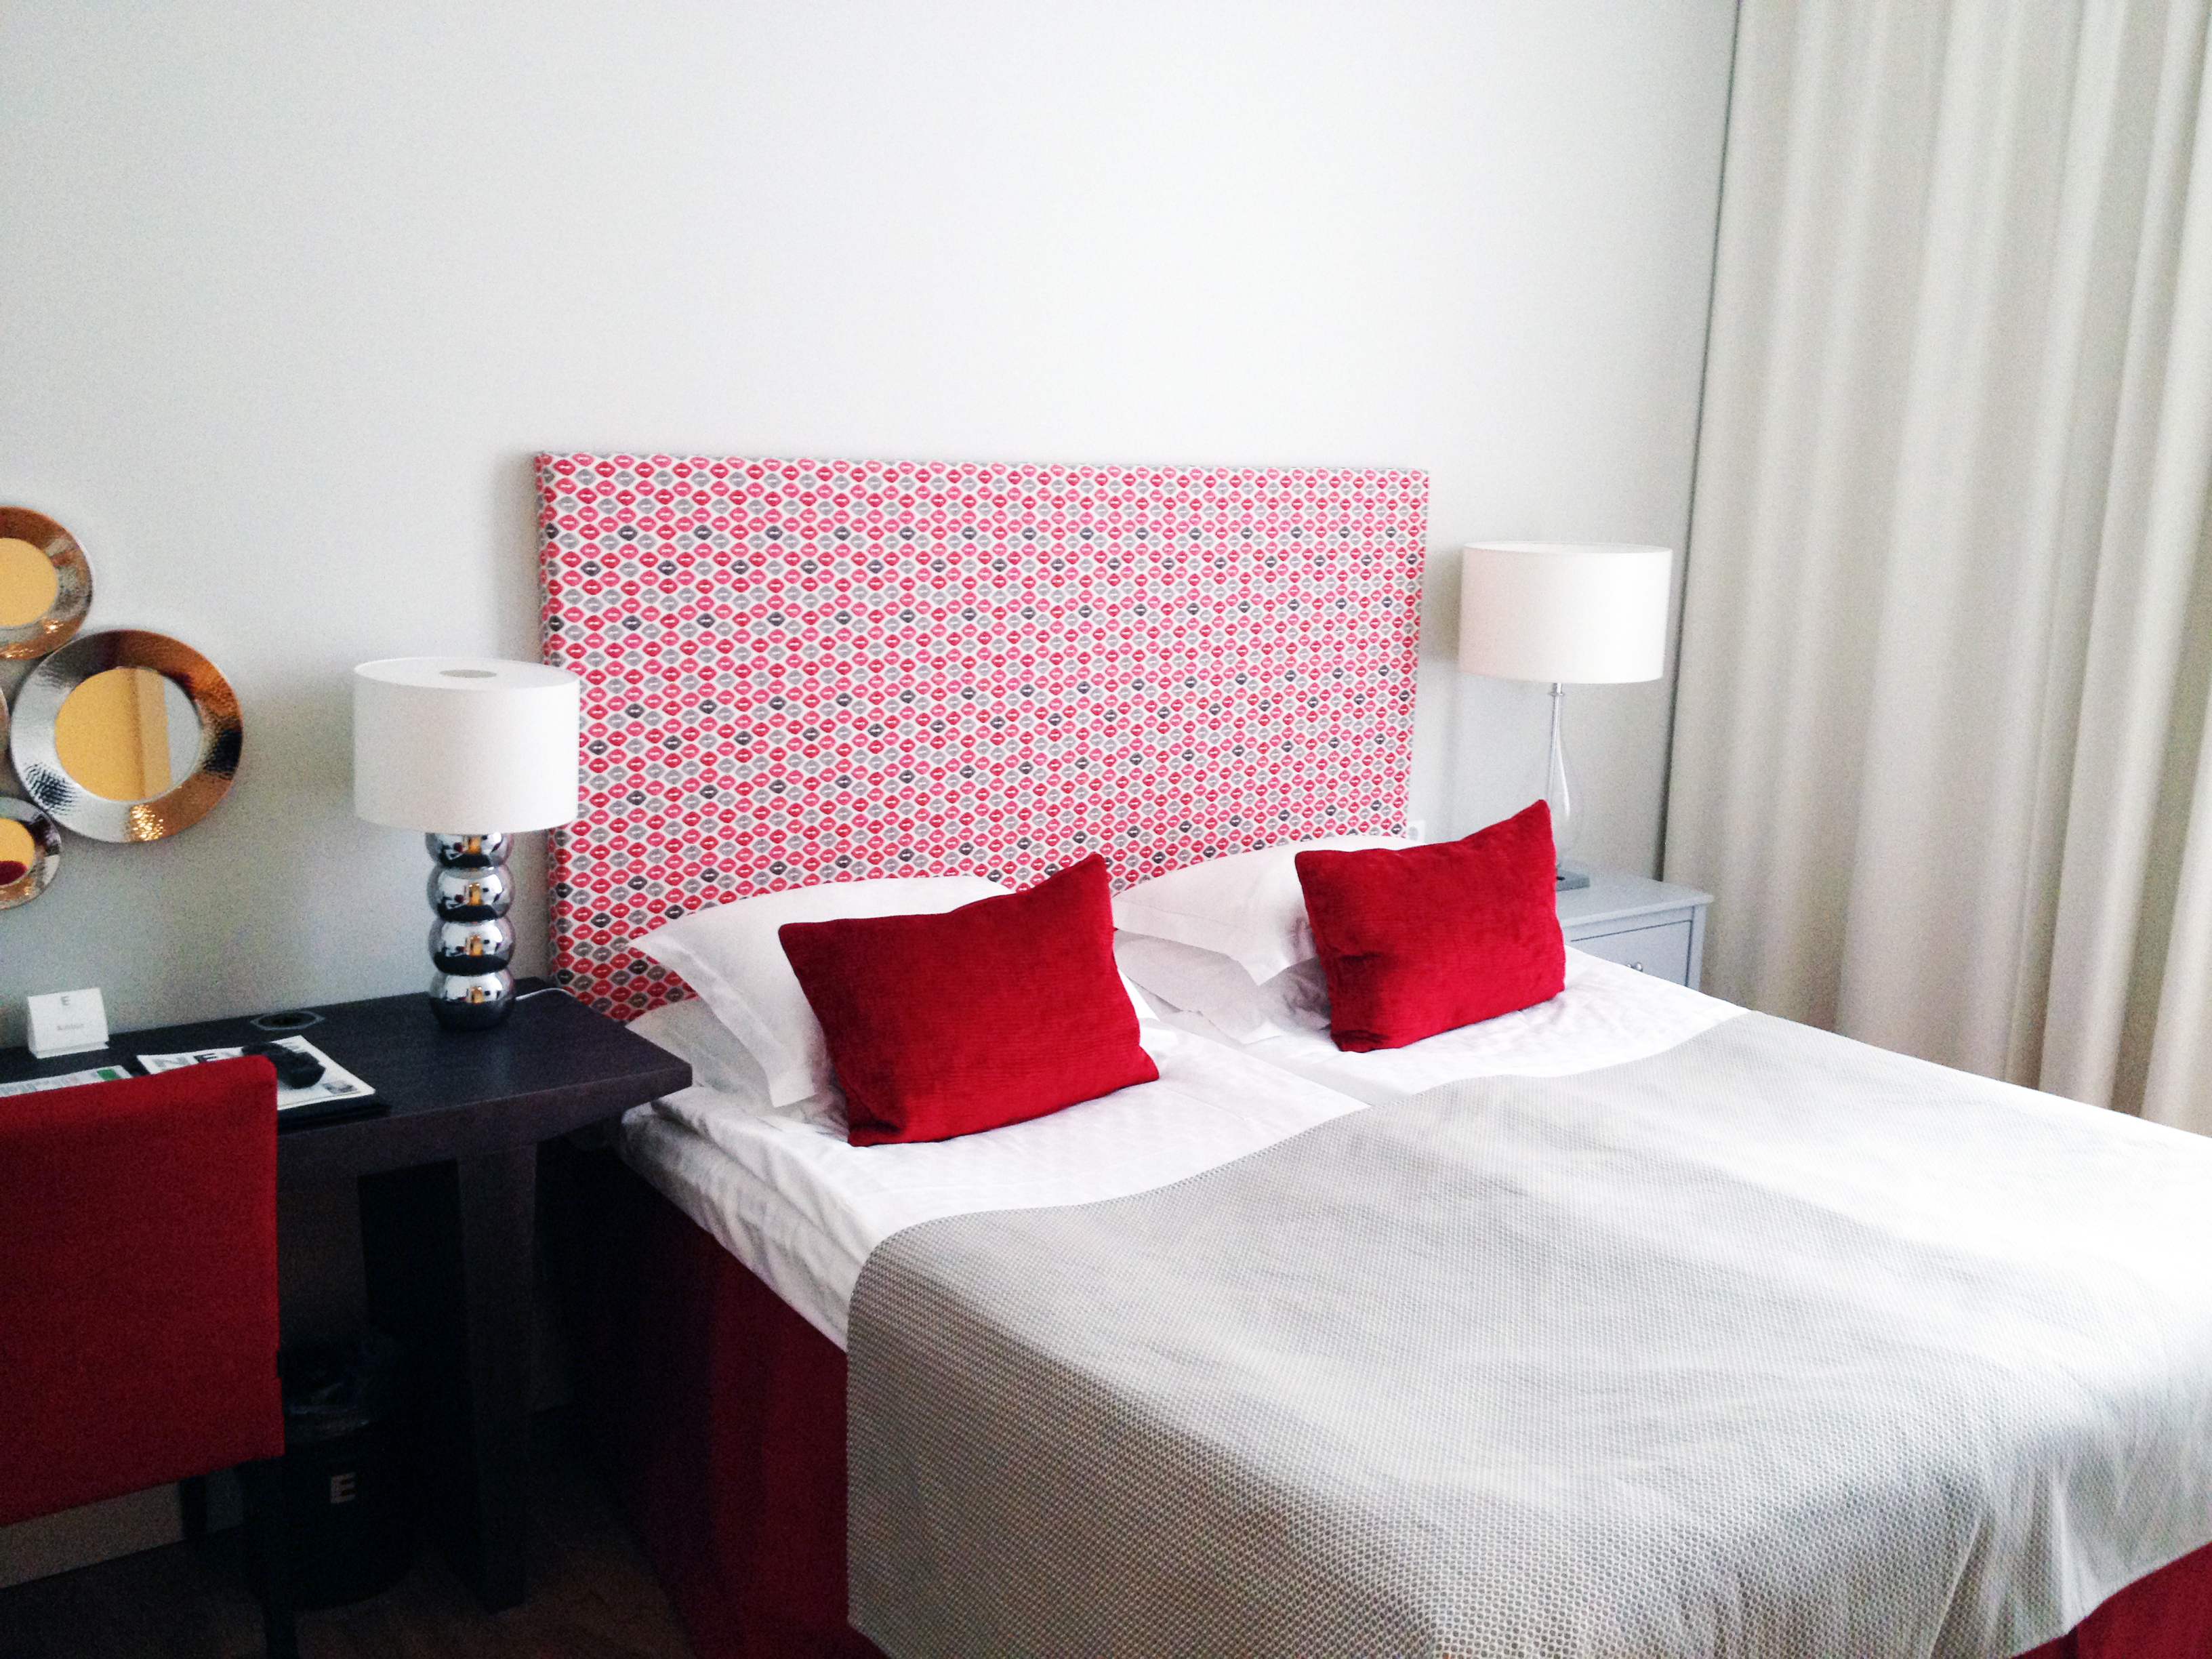 Hotel room with double bed, red headboard and desk